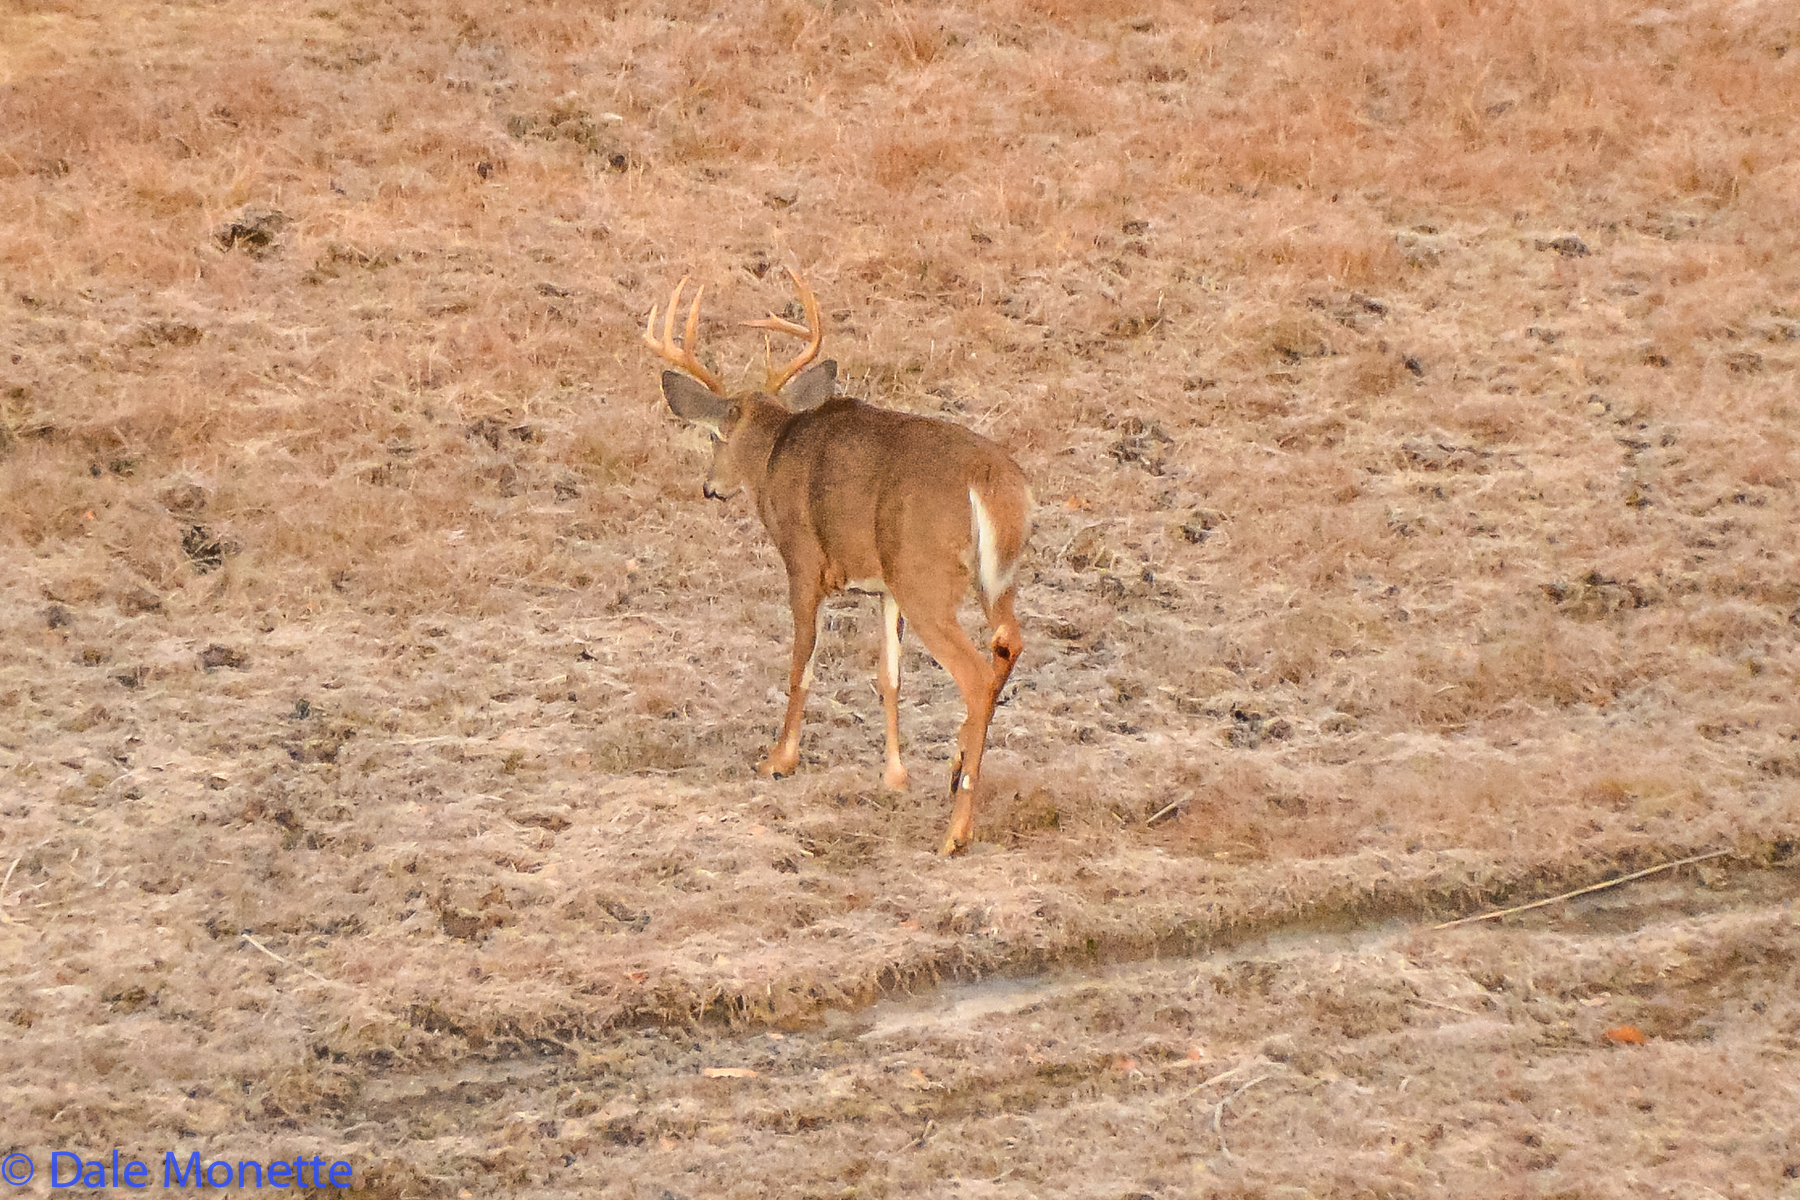   I was perched on a ridge when this ten point buck wandered in front of me in the late fall.  